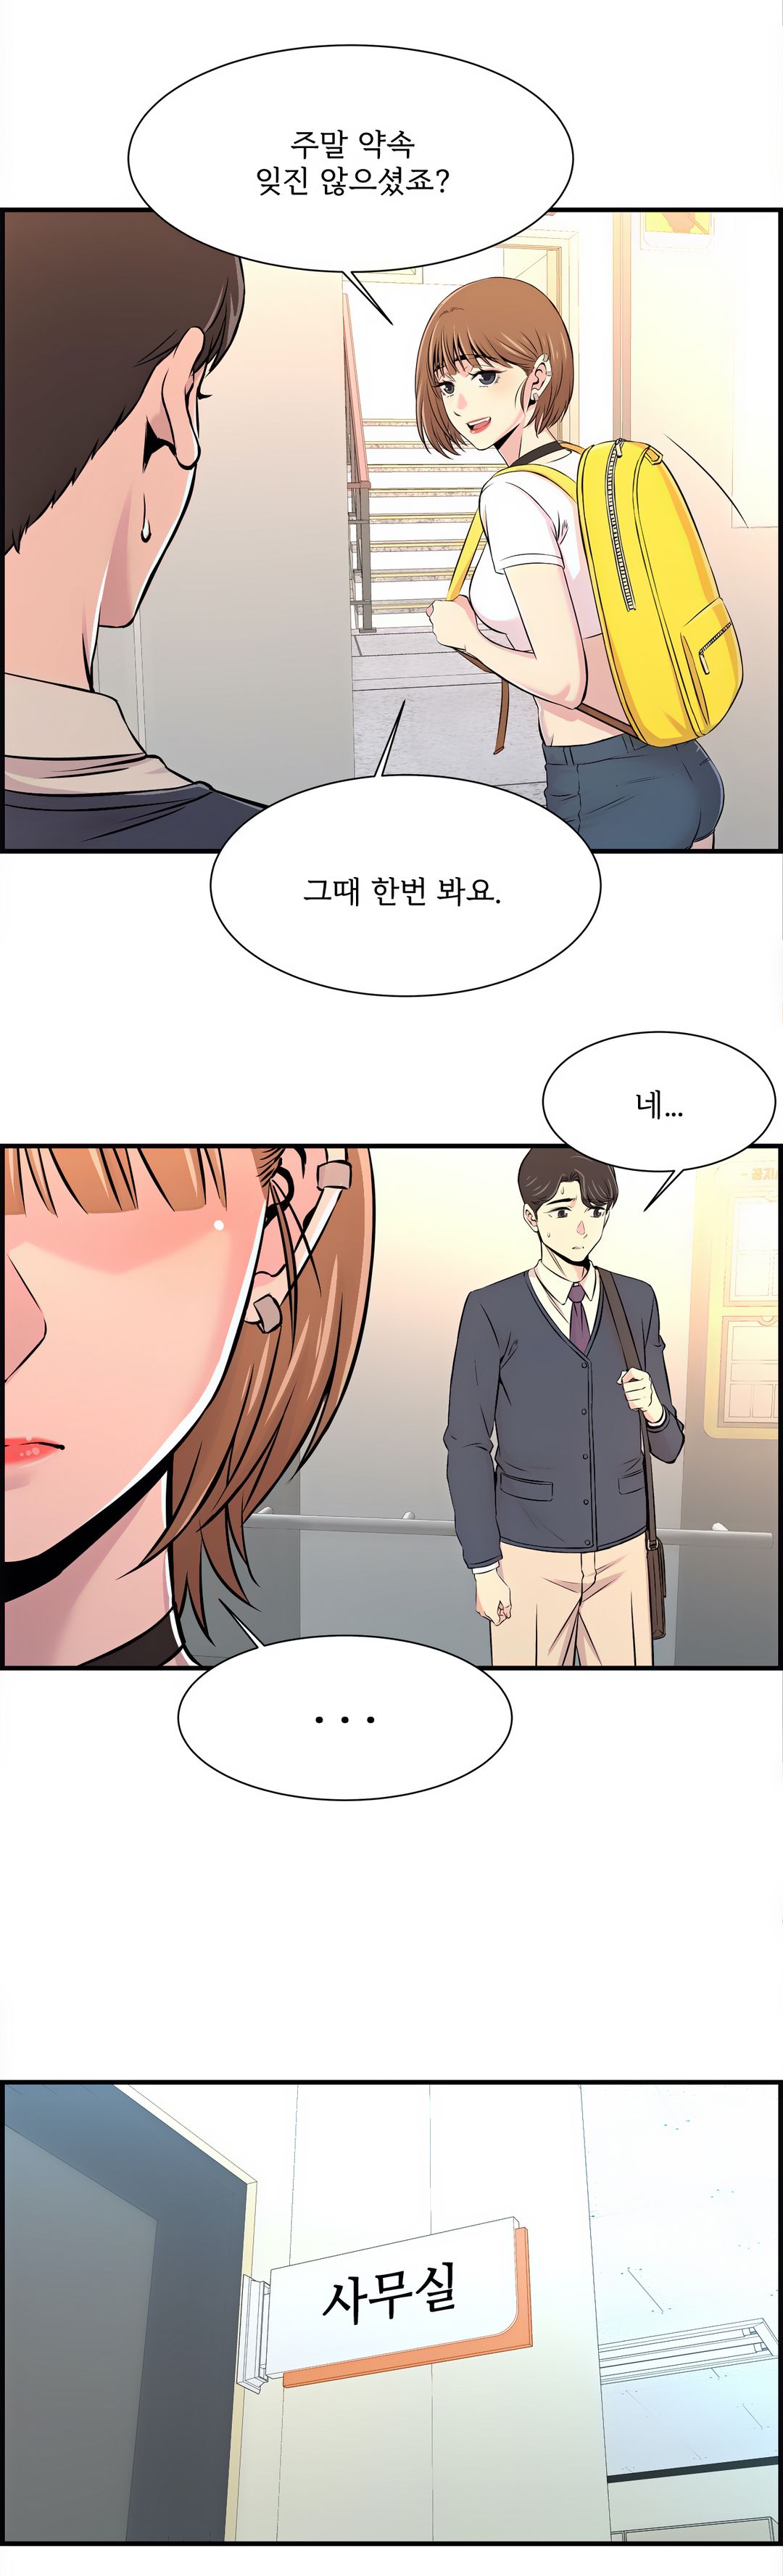 Cram School Scandal Raw - Chapter 13 Page 6